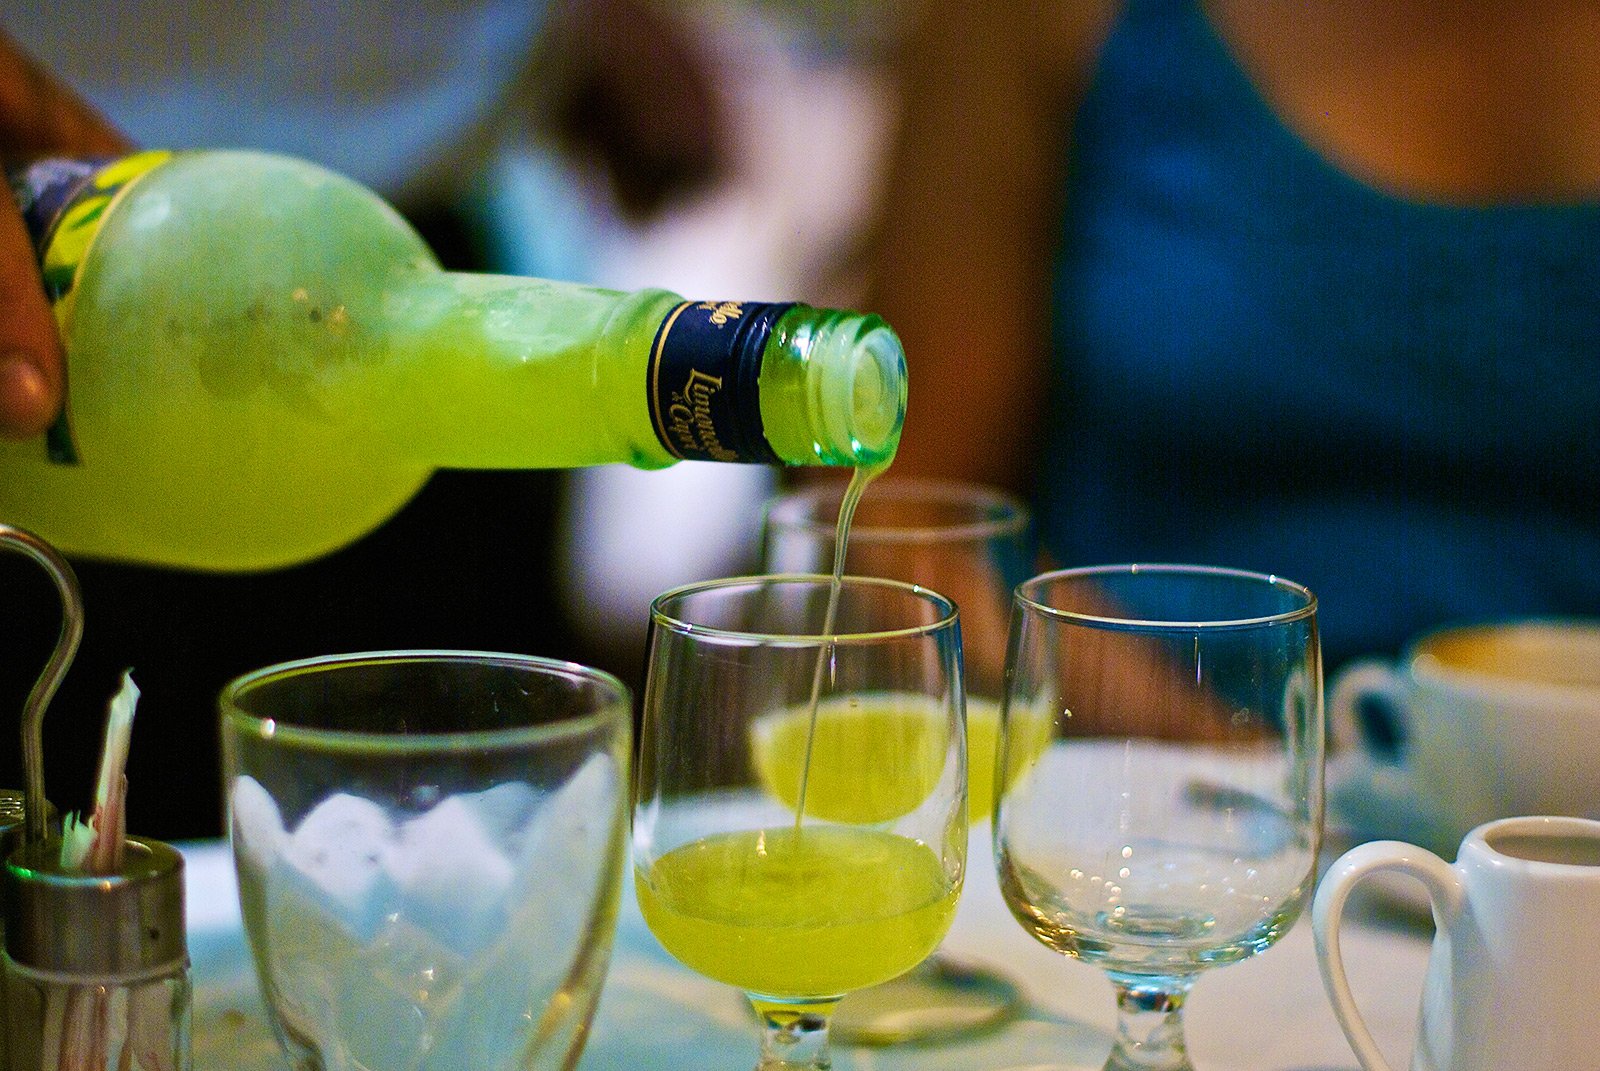 How to try limoncello in Sicily